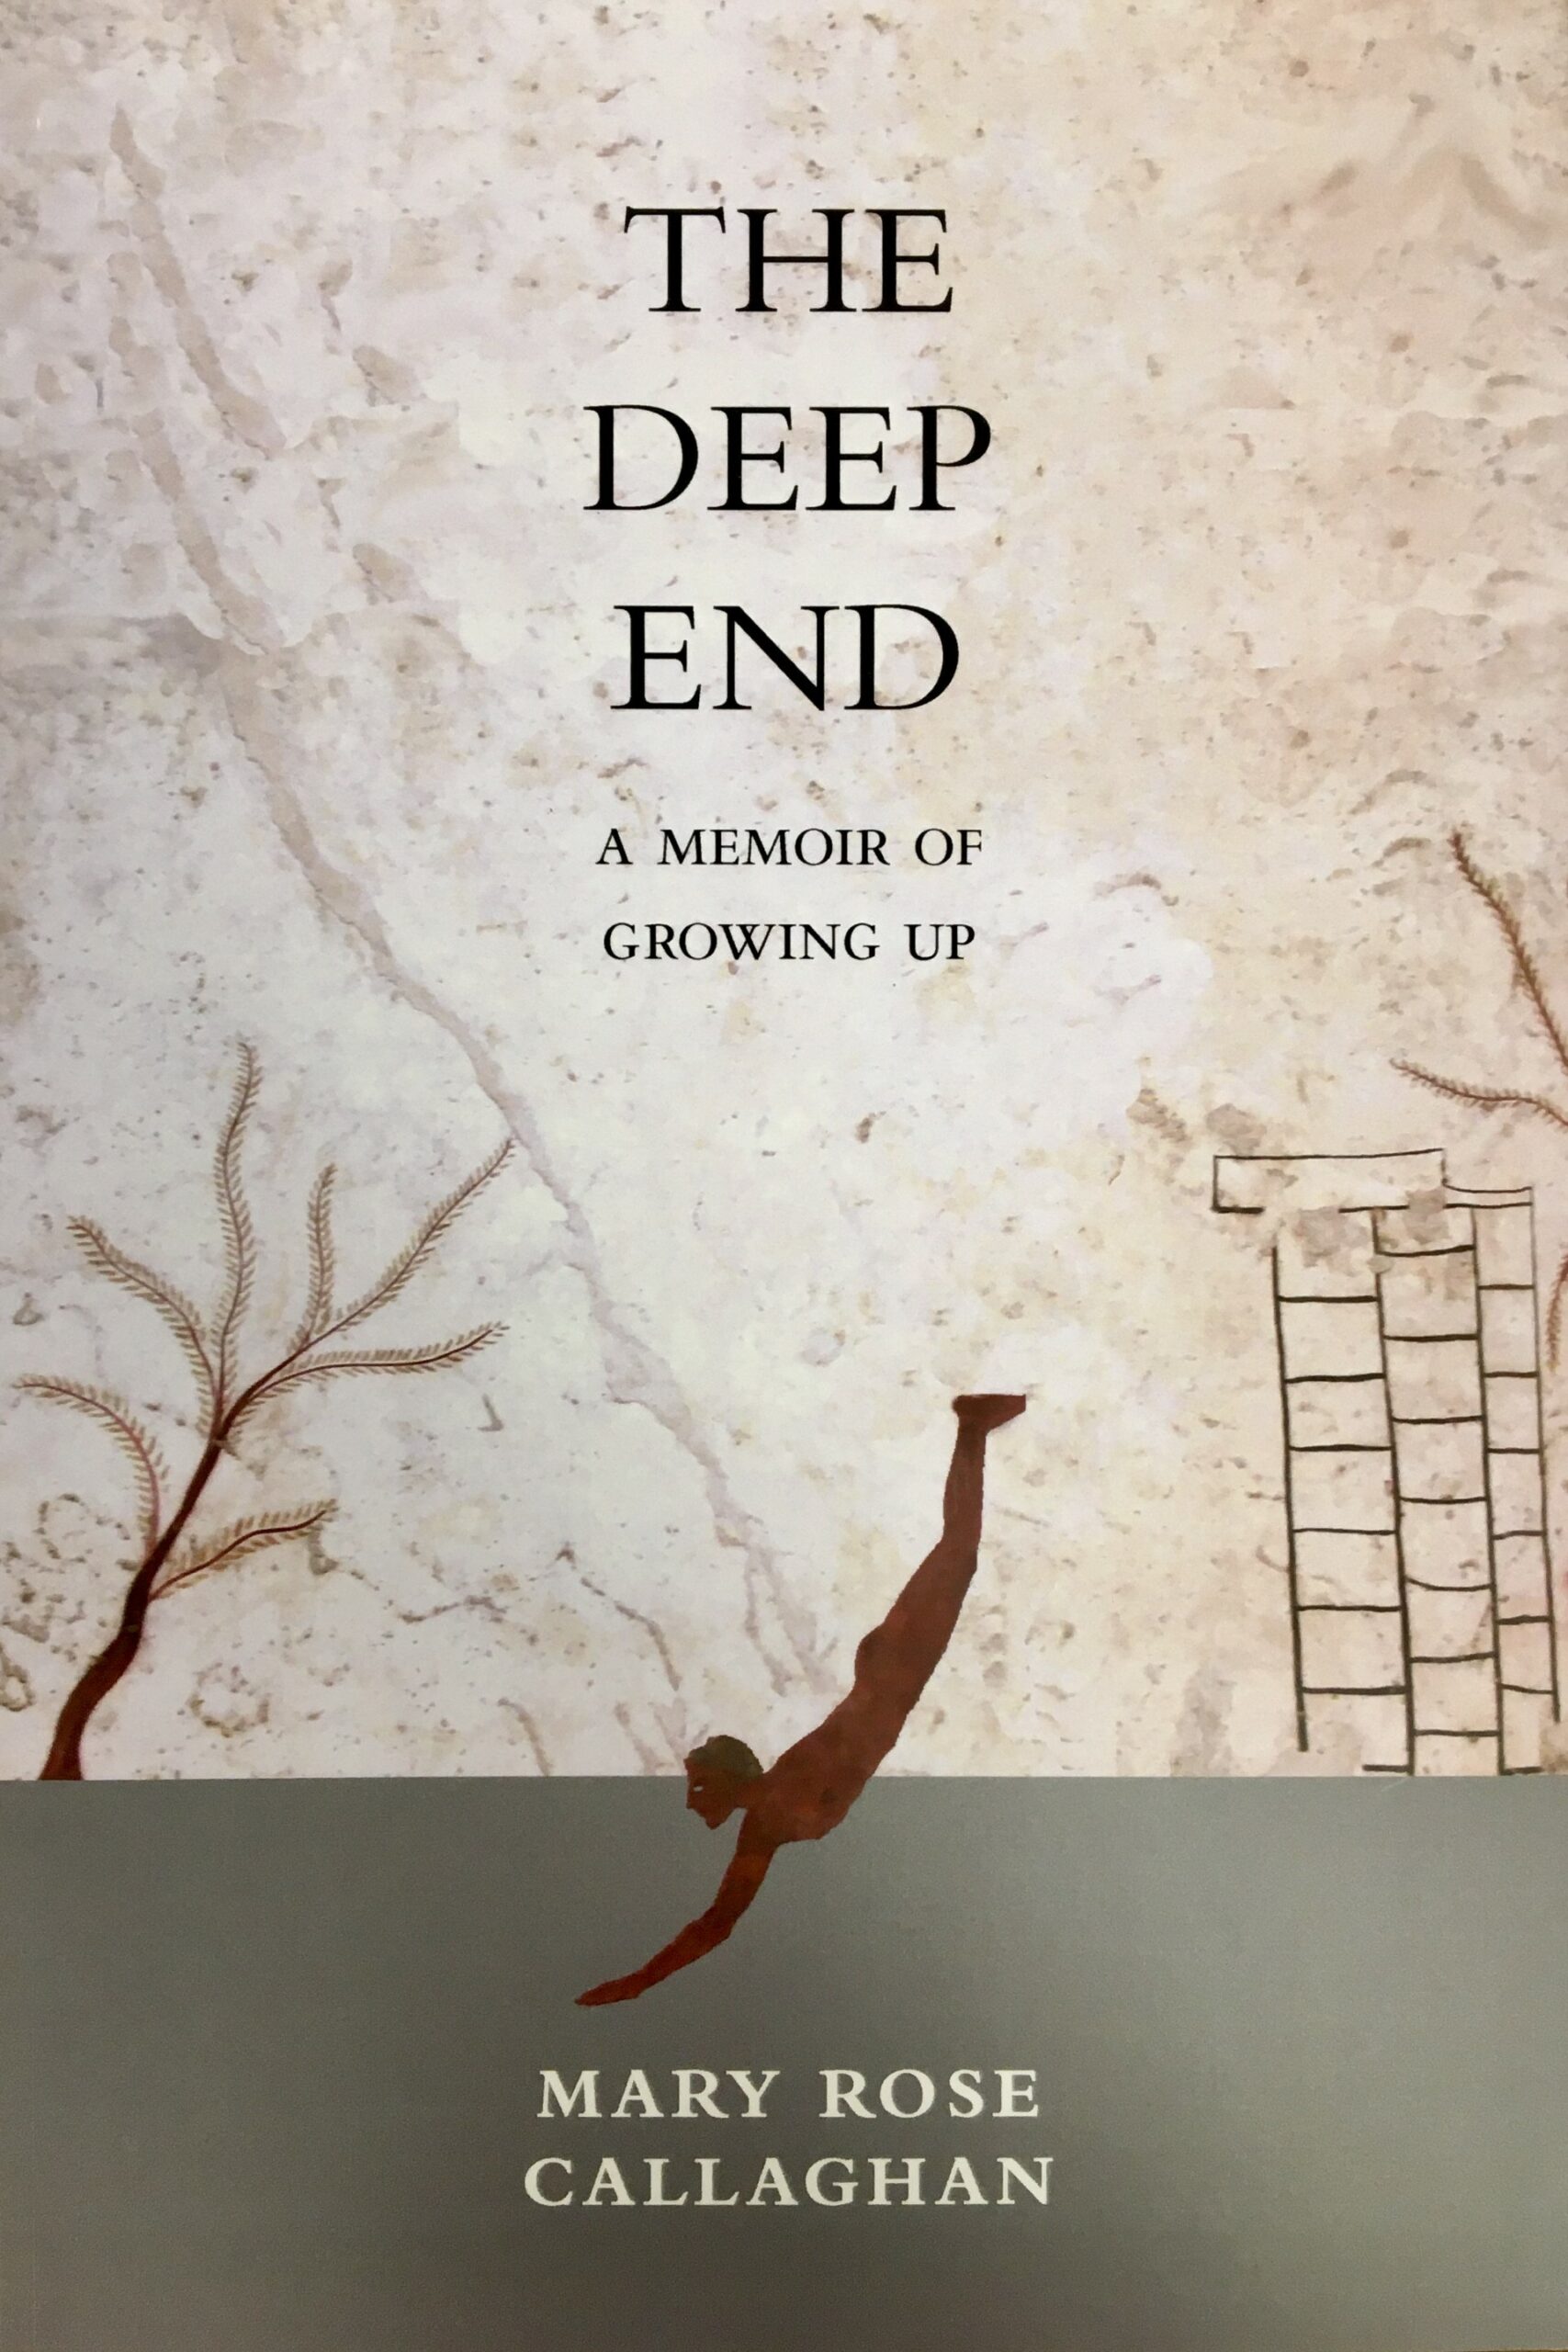 The Deep End by Mary Rose Callaghan